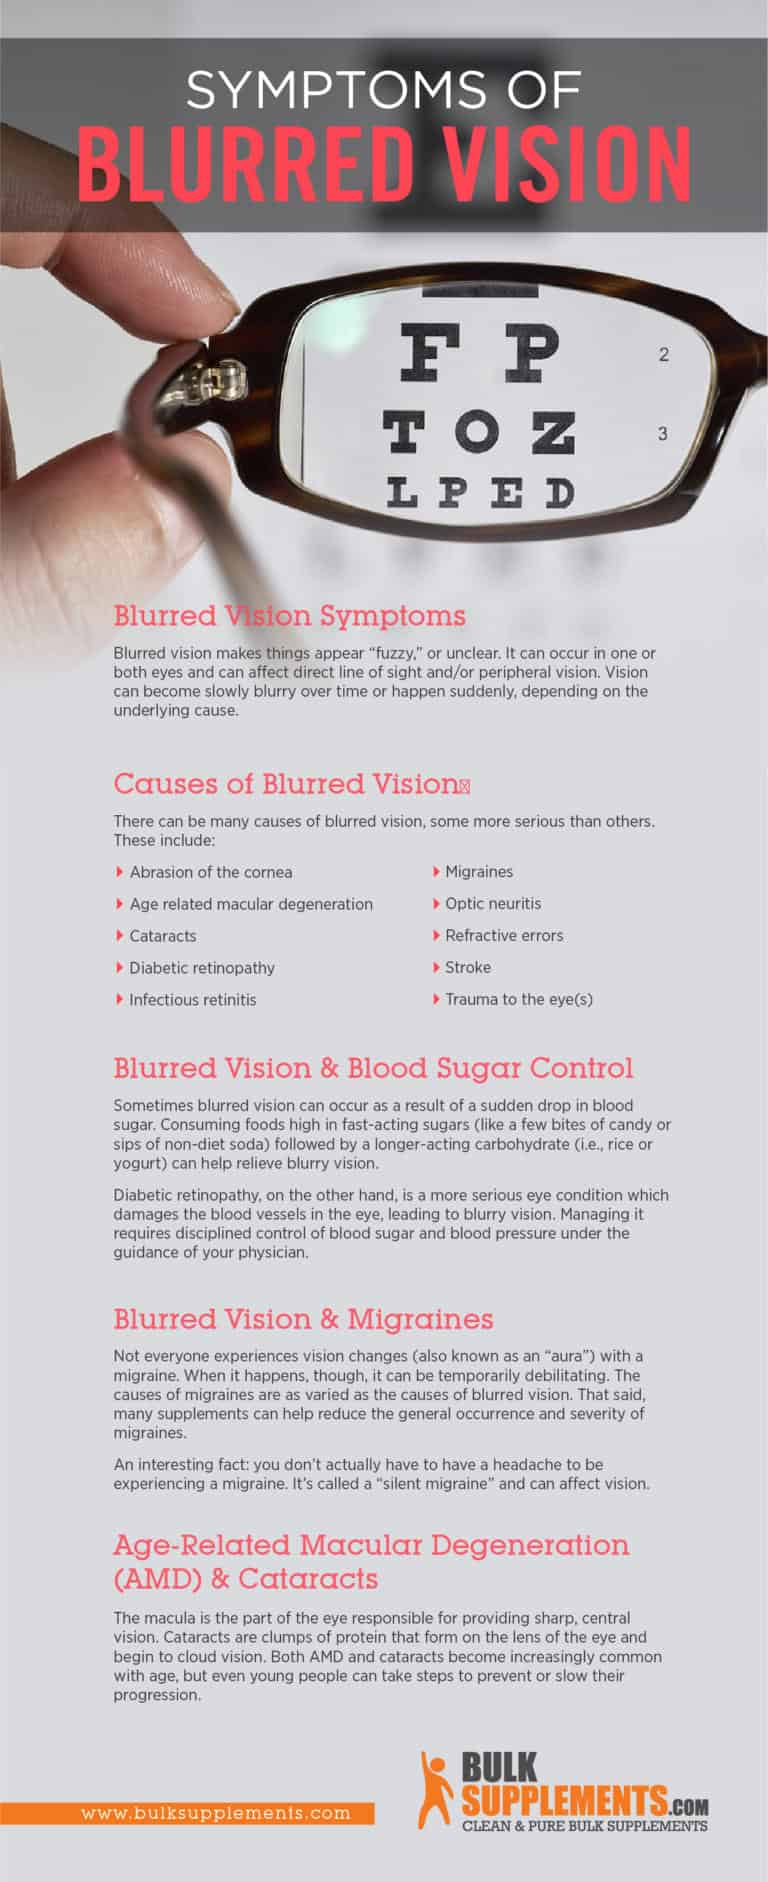 Blurred Vision Symptoms, Causes and Treatments by James Denlinger